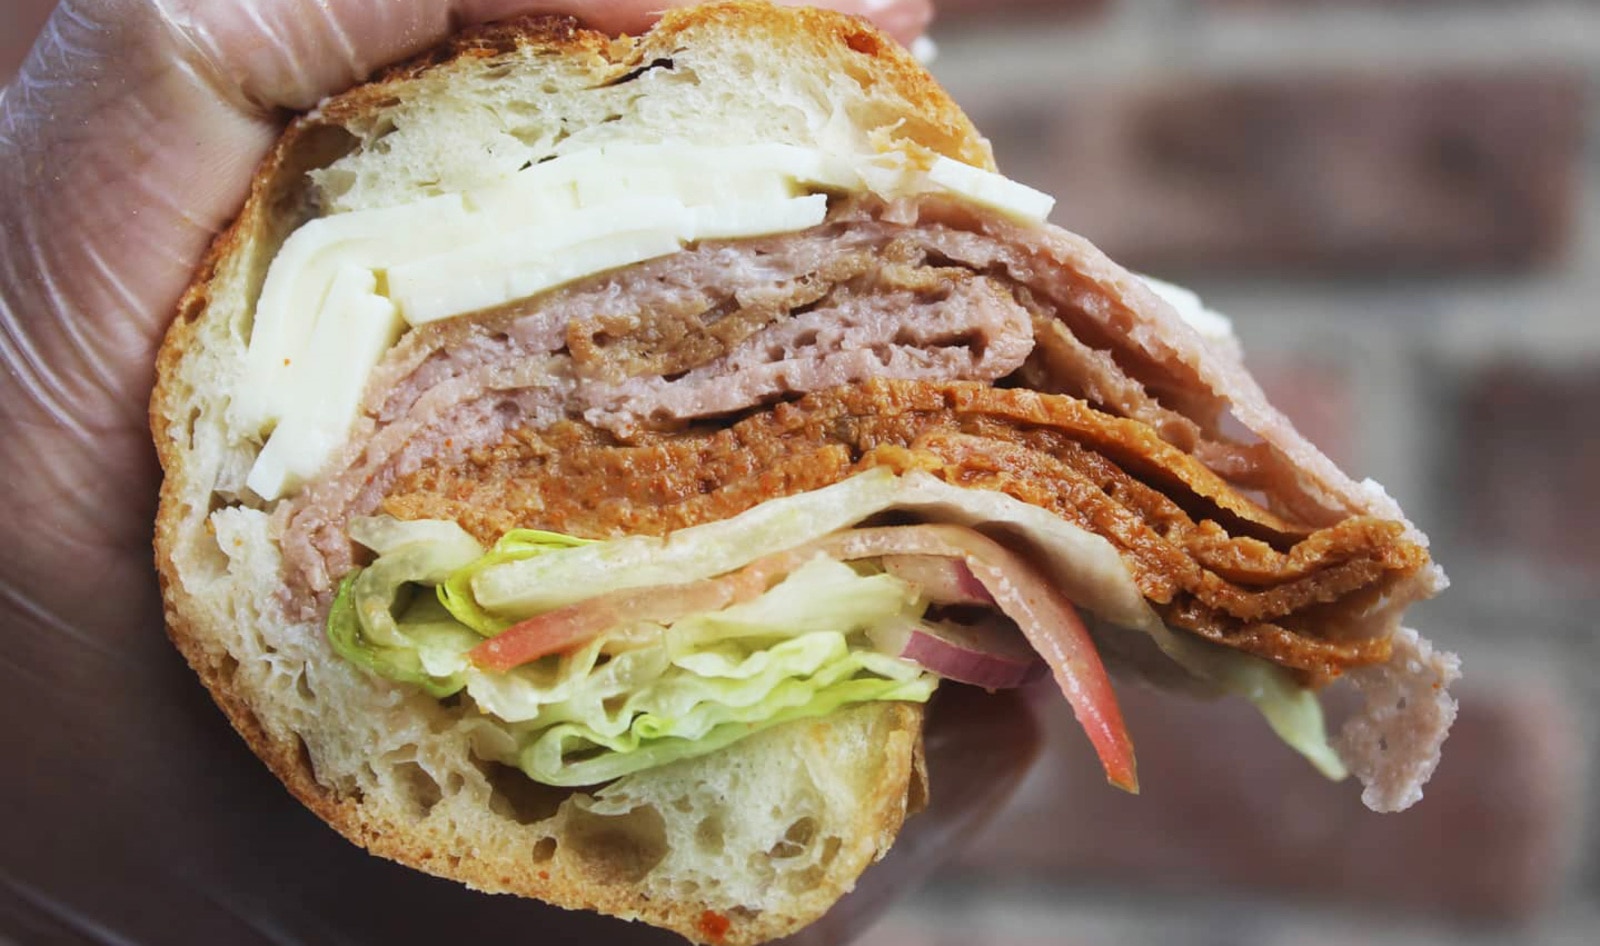 Vegan Deli Meat Delivery Service Launches in NYC